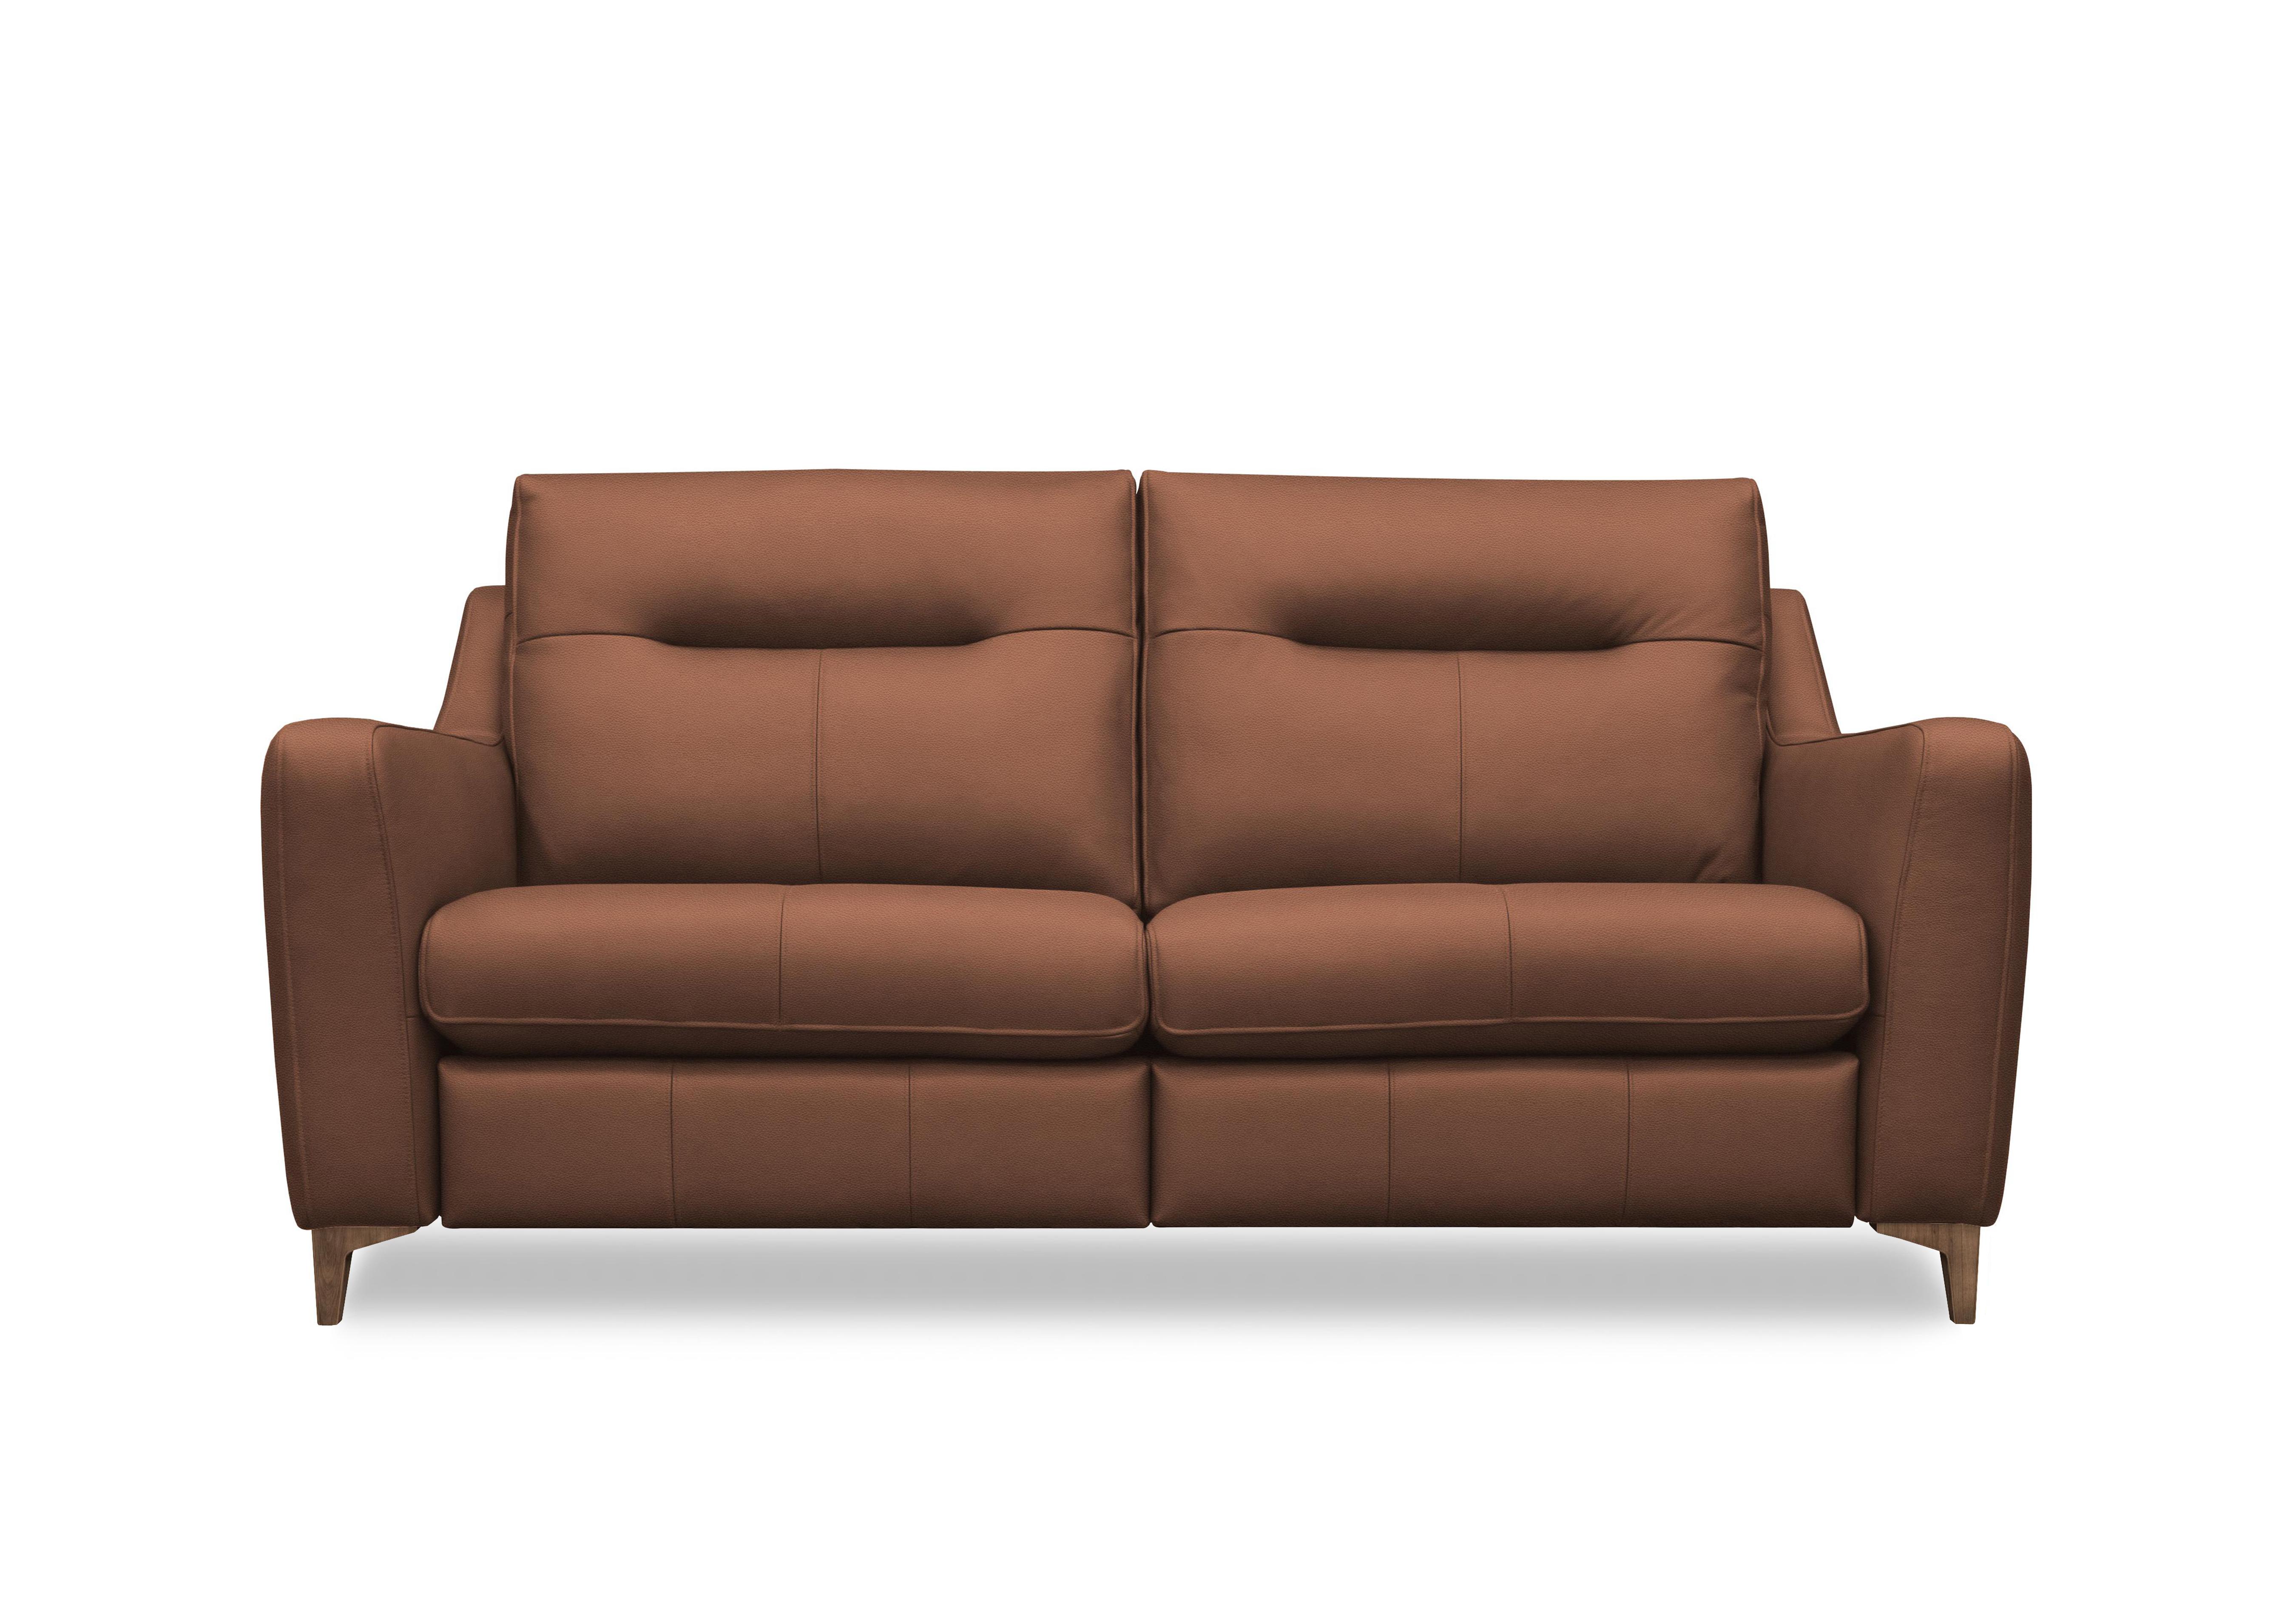 Arlo 3 Seater Leather Sofa in L848 Cambridge Conker Wal Ft on Furniture Village